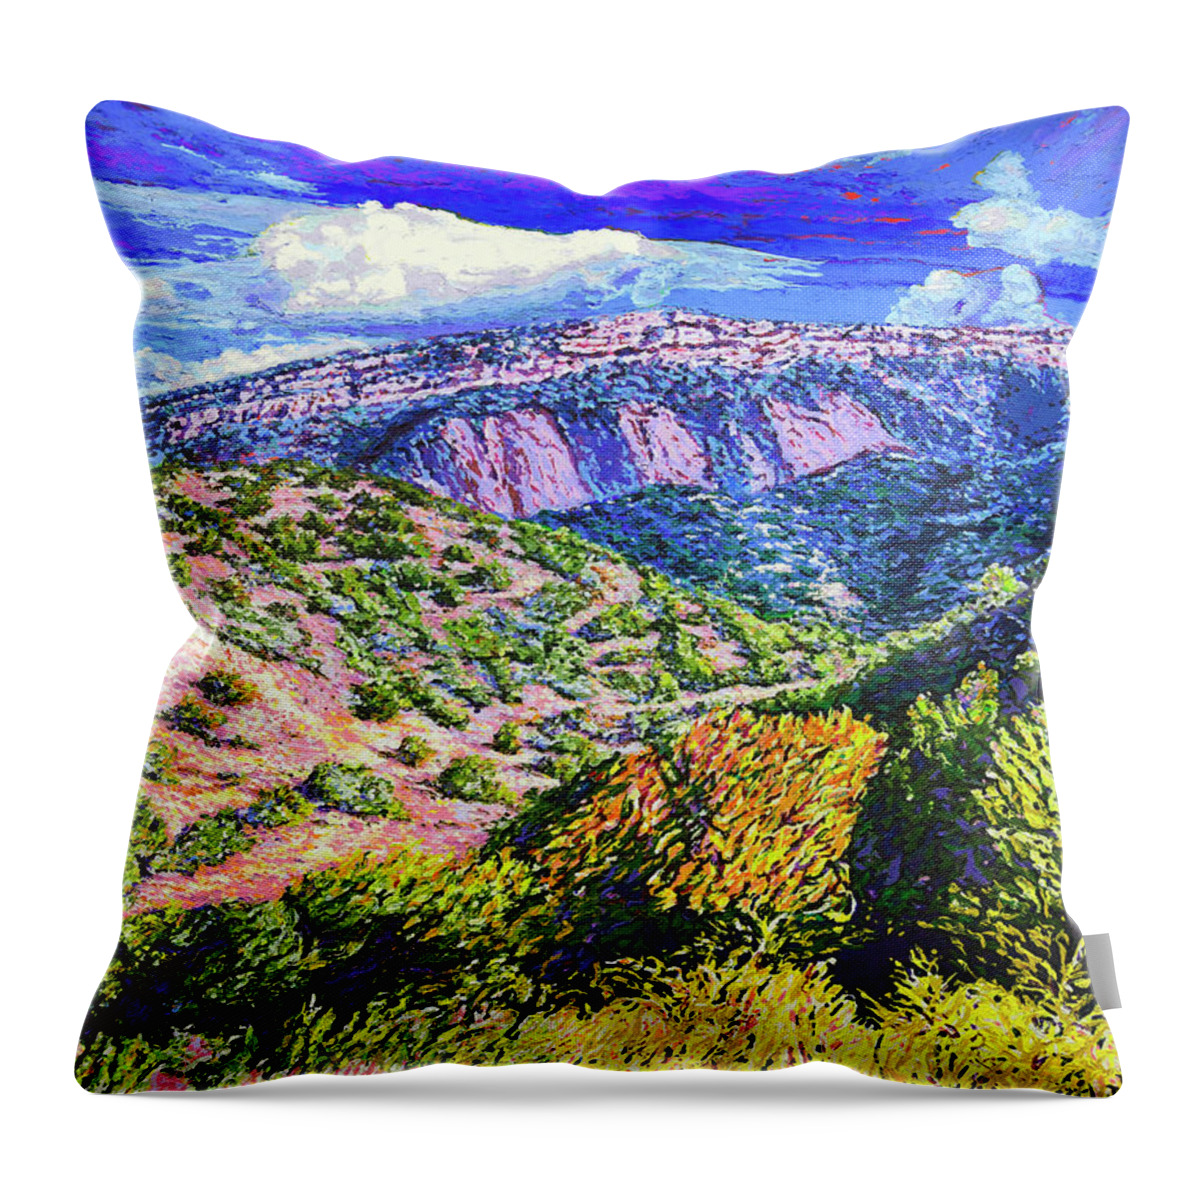 Impressionism Throw Pillow featuring the painting Finding My Way by Darien Bogart